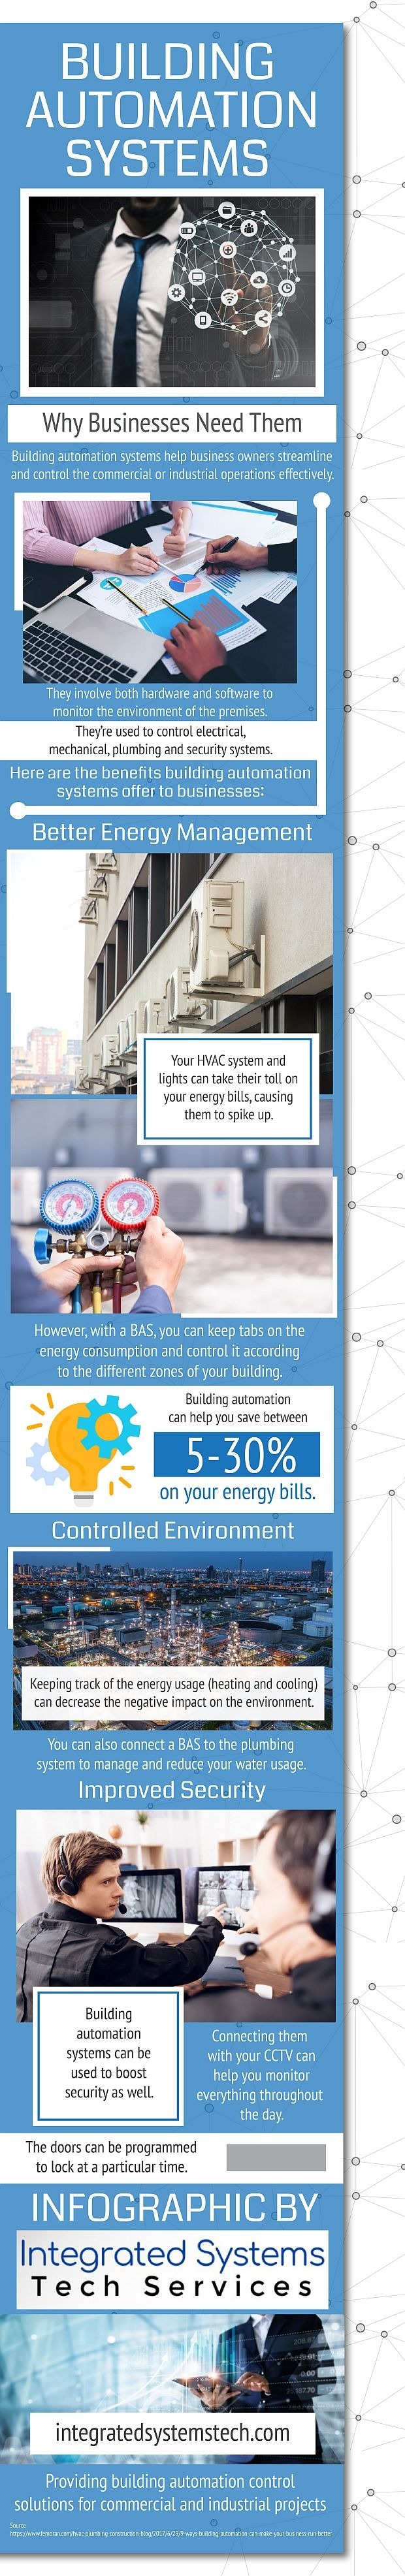 Building Automation Infographic